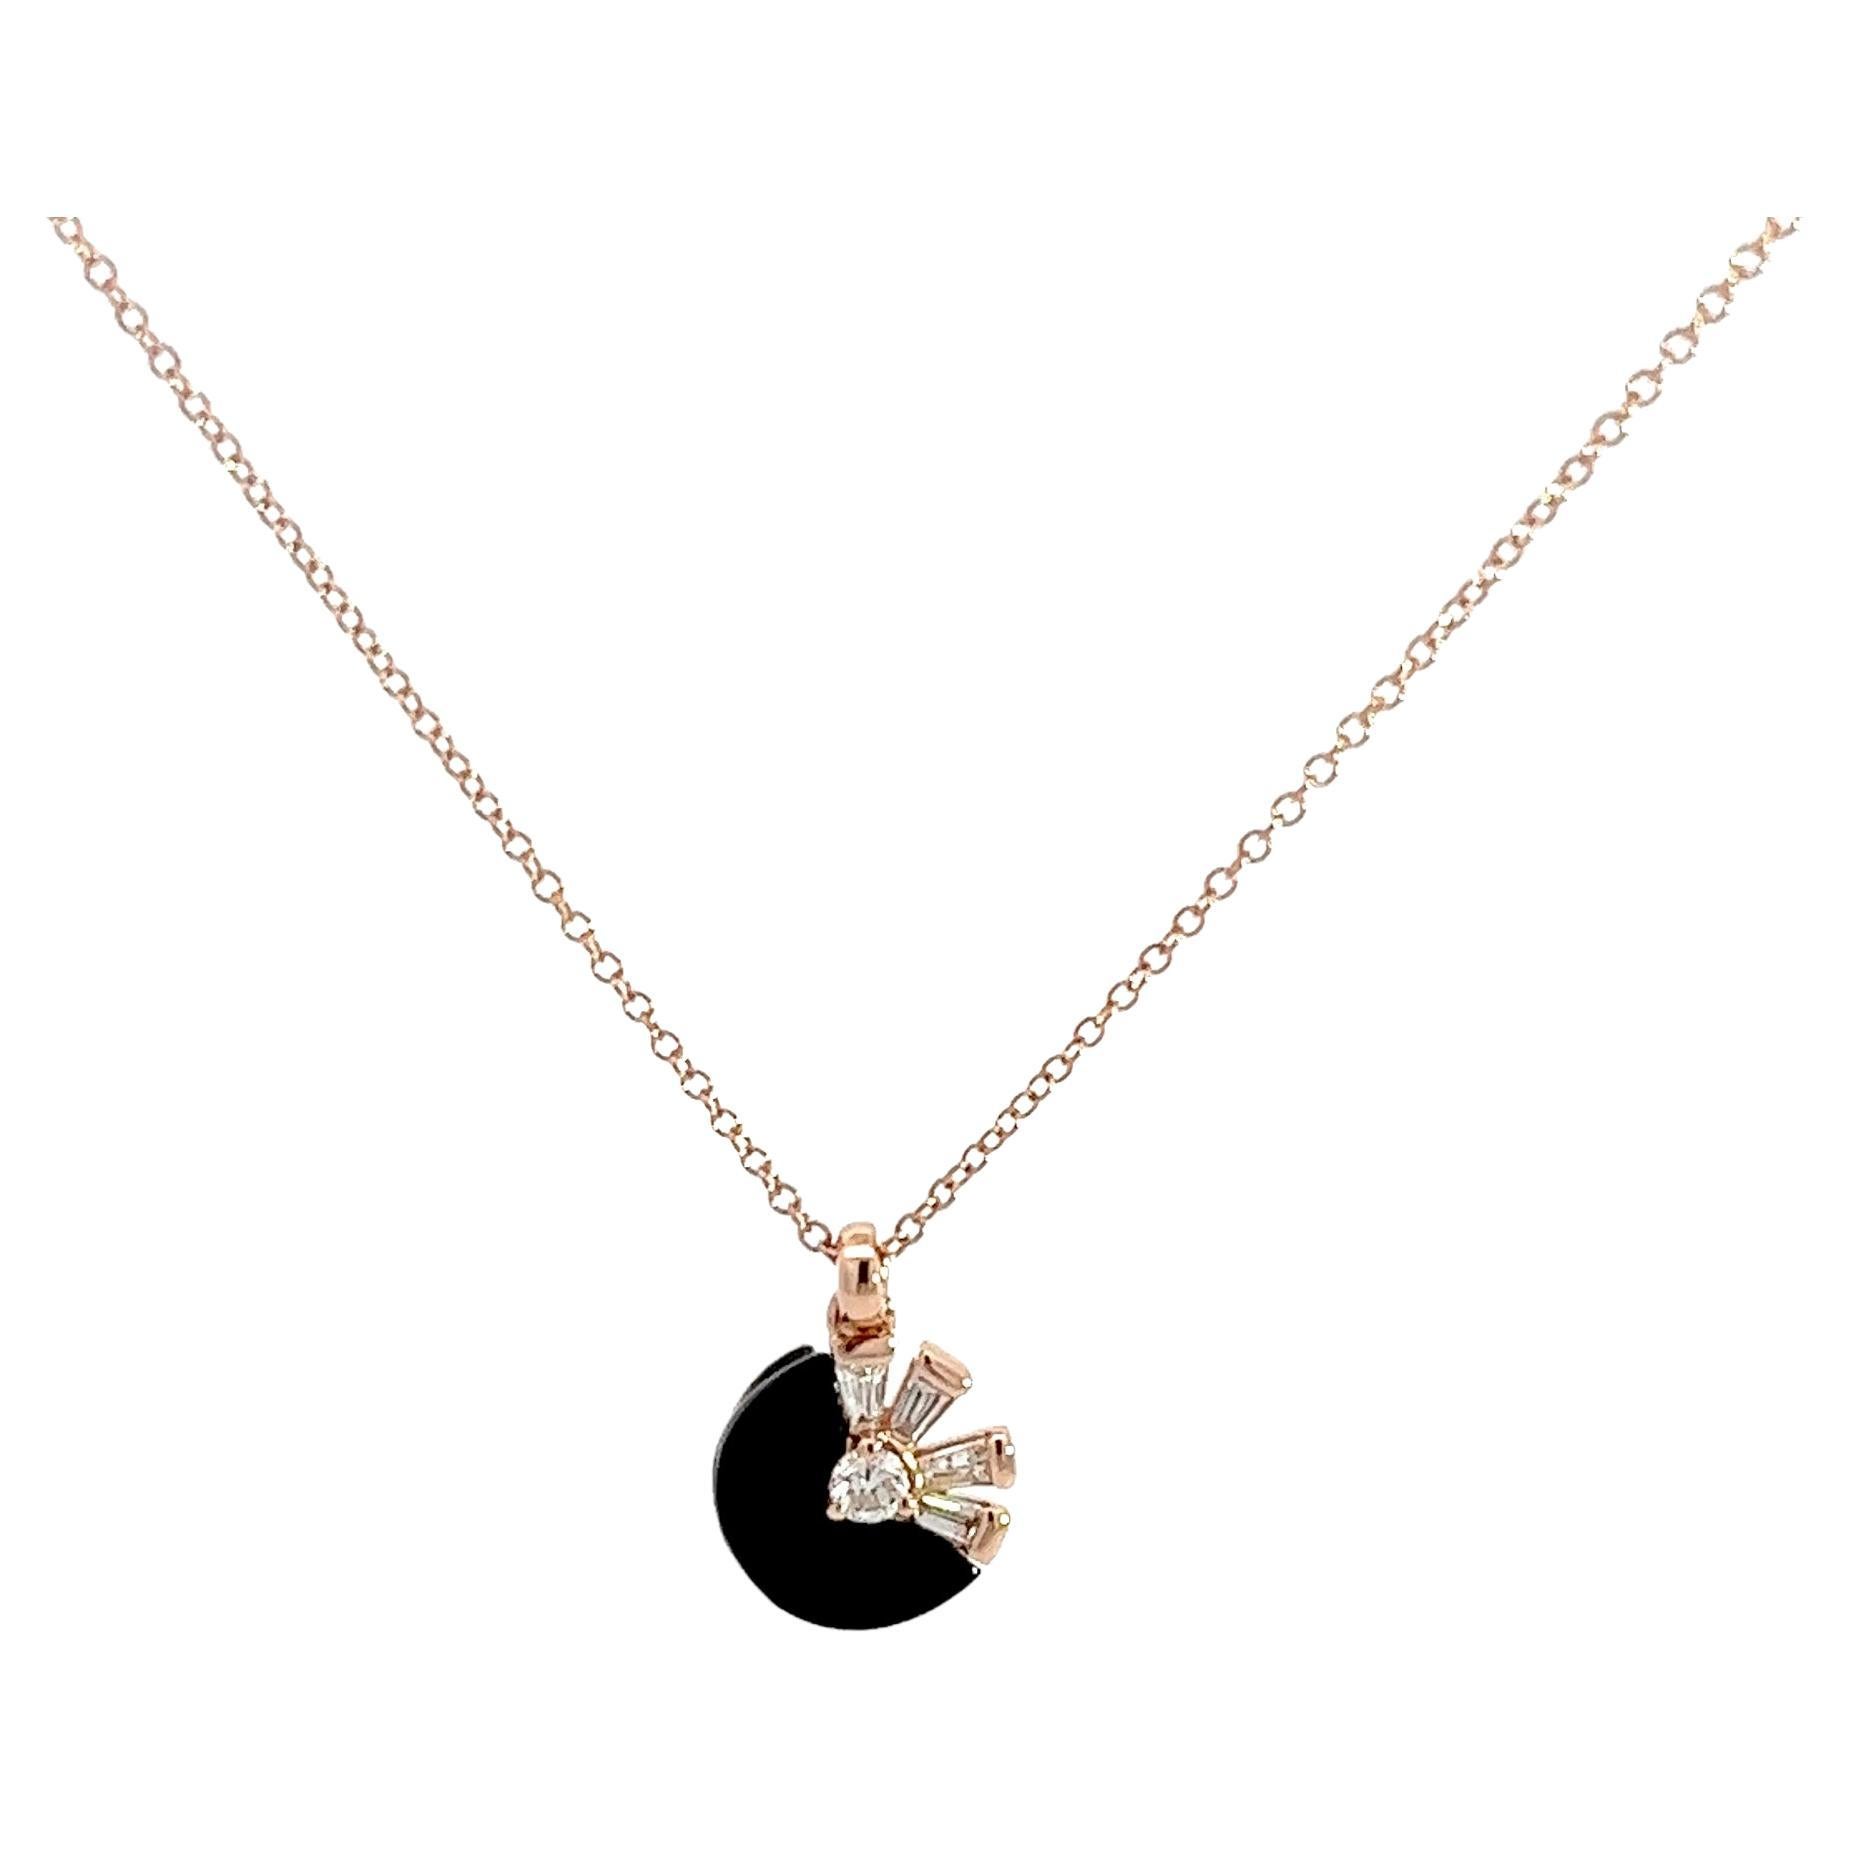 Eternelle Necklace Onyx Diamond Rose Gold for Her